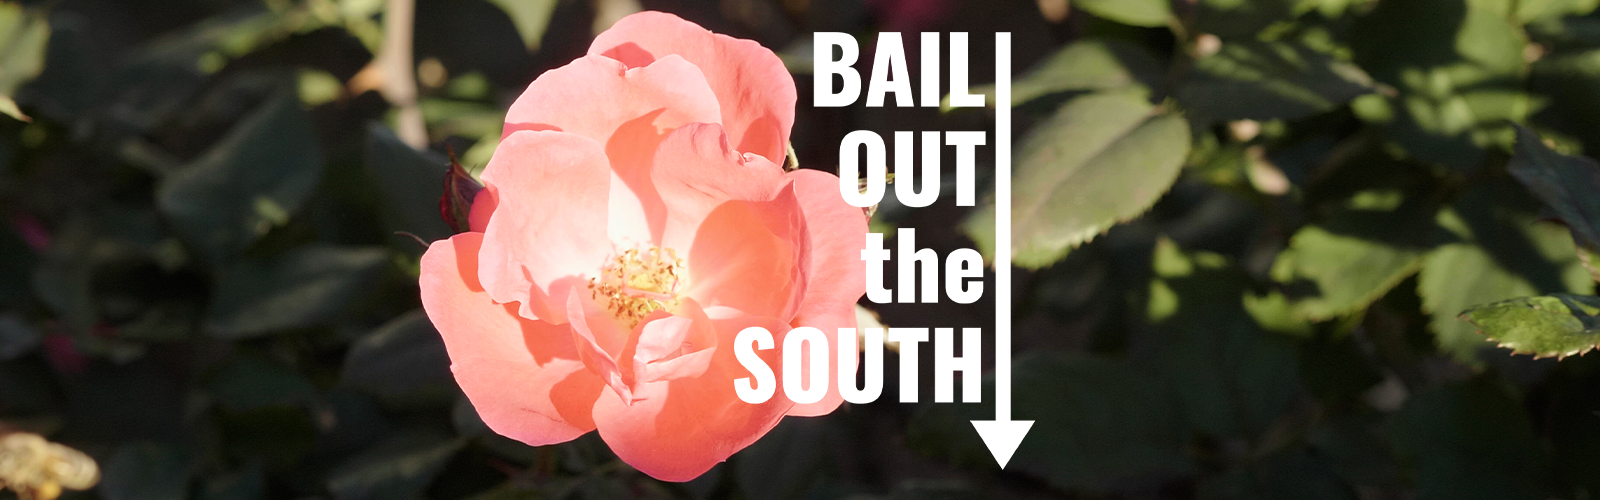 The Bail Project_Bail Out the South